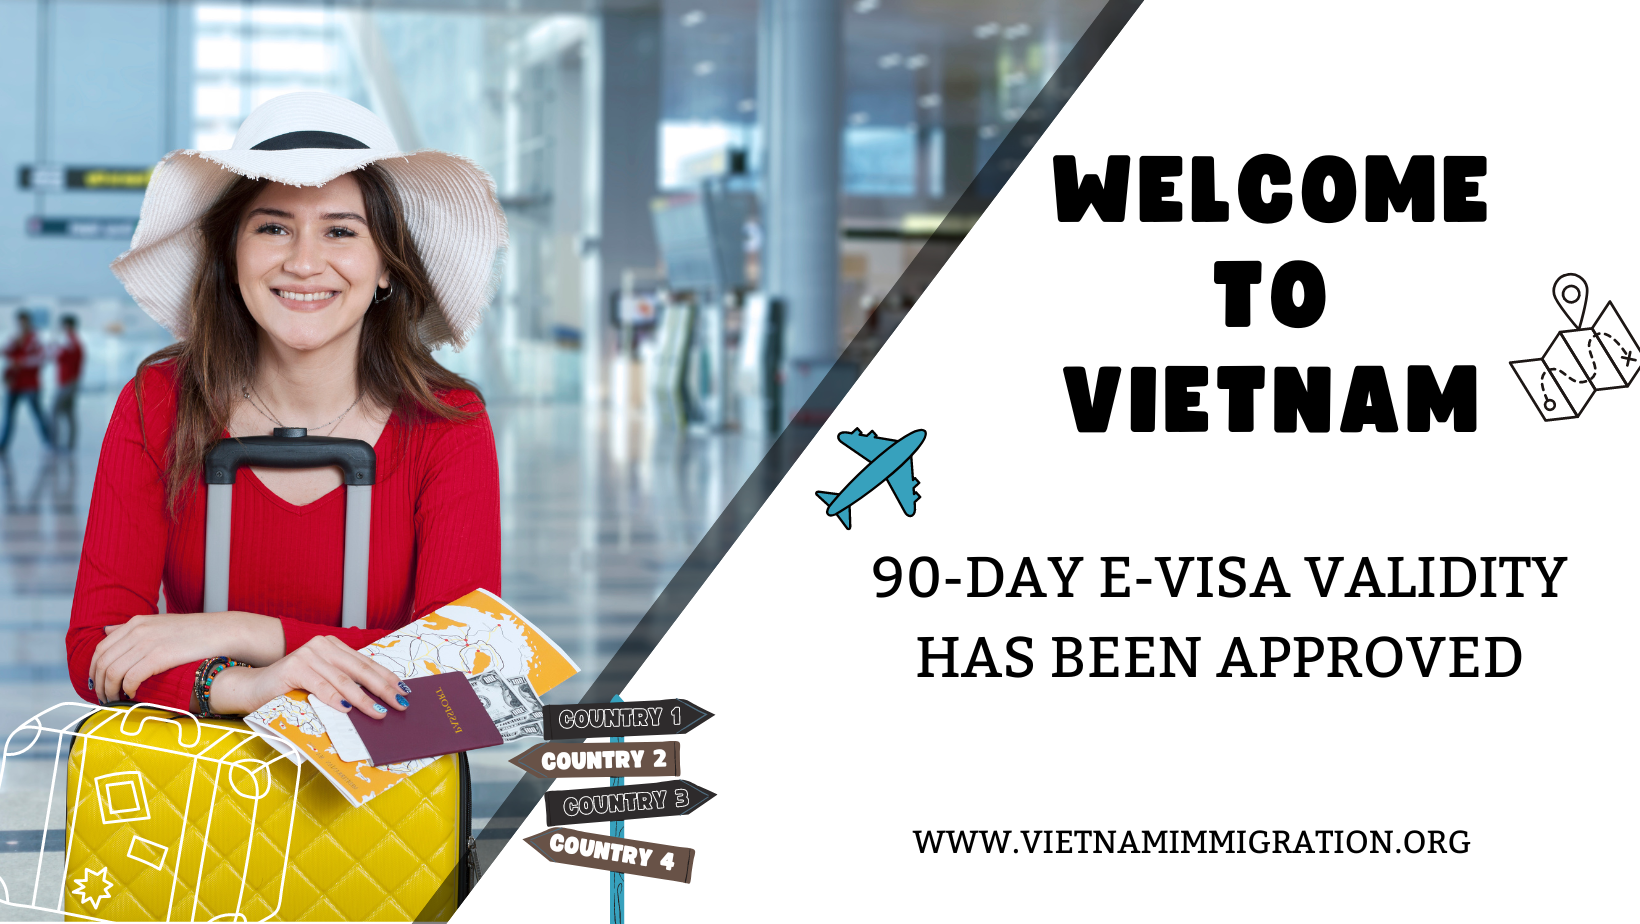 Welcome to Vietnam: 90-Day E-Visa Validity Has Been Approved